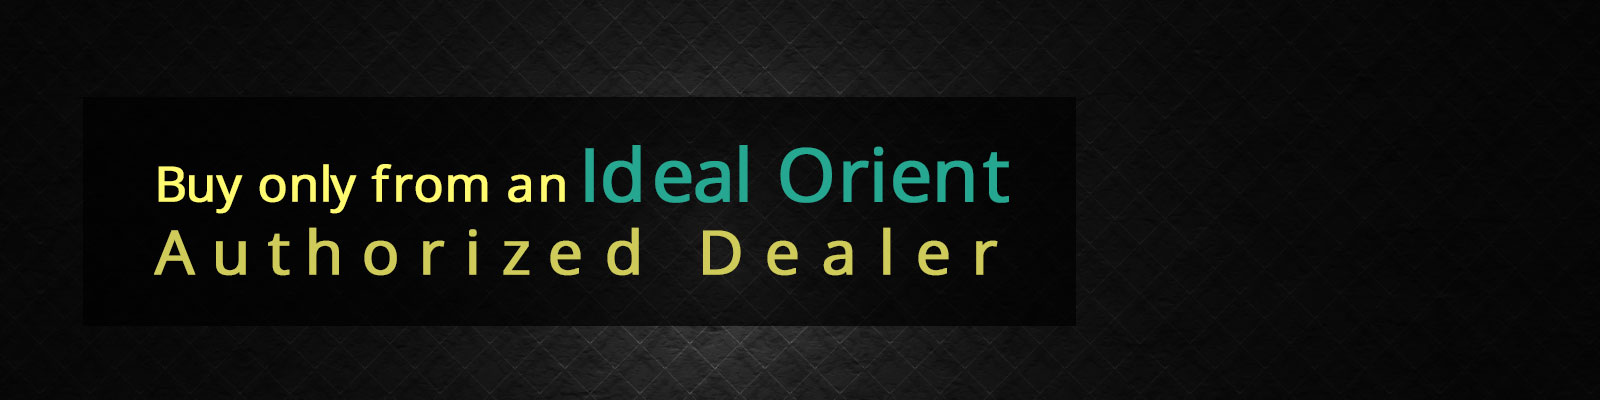 Contact Ideal Orient